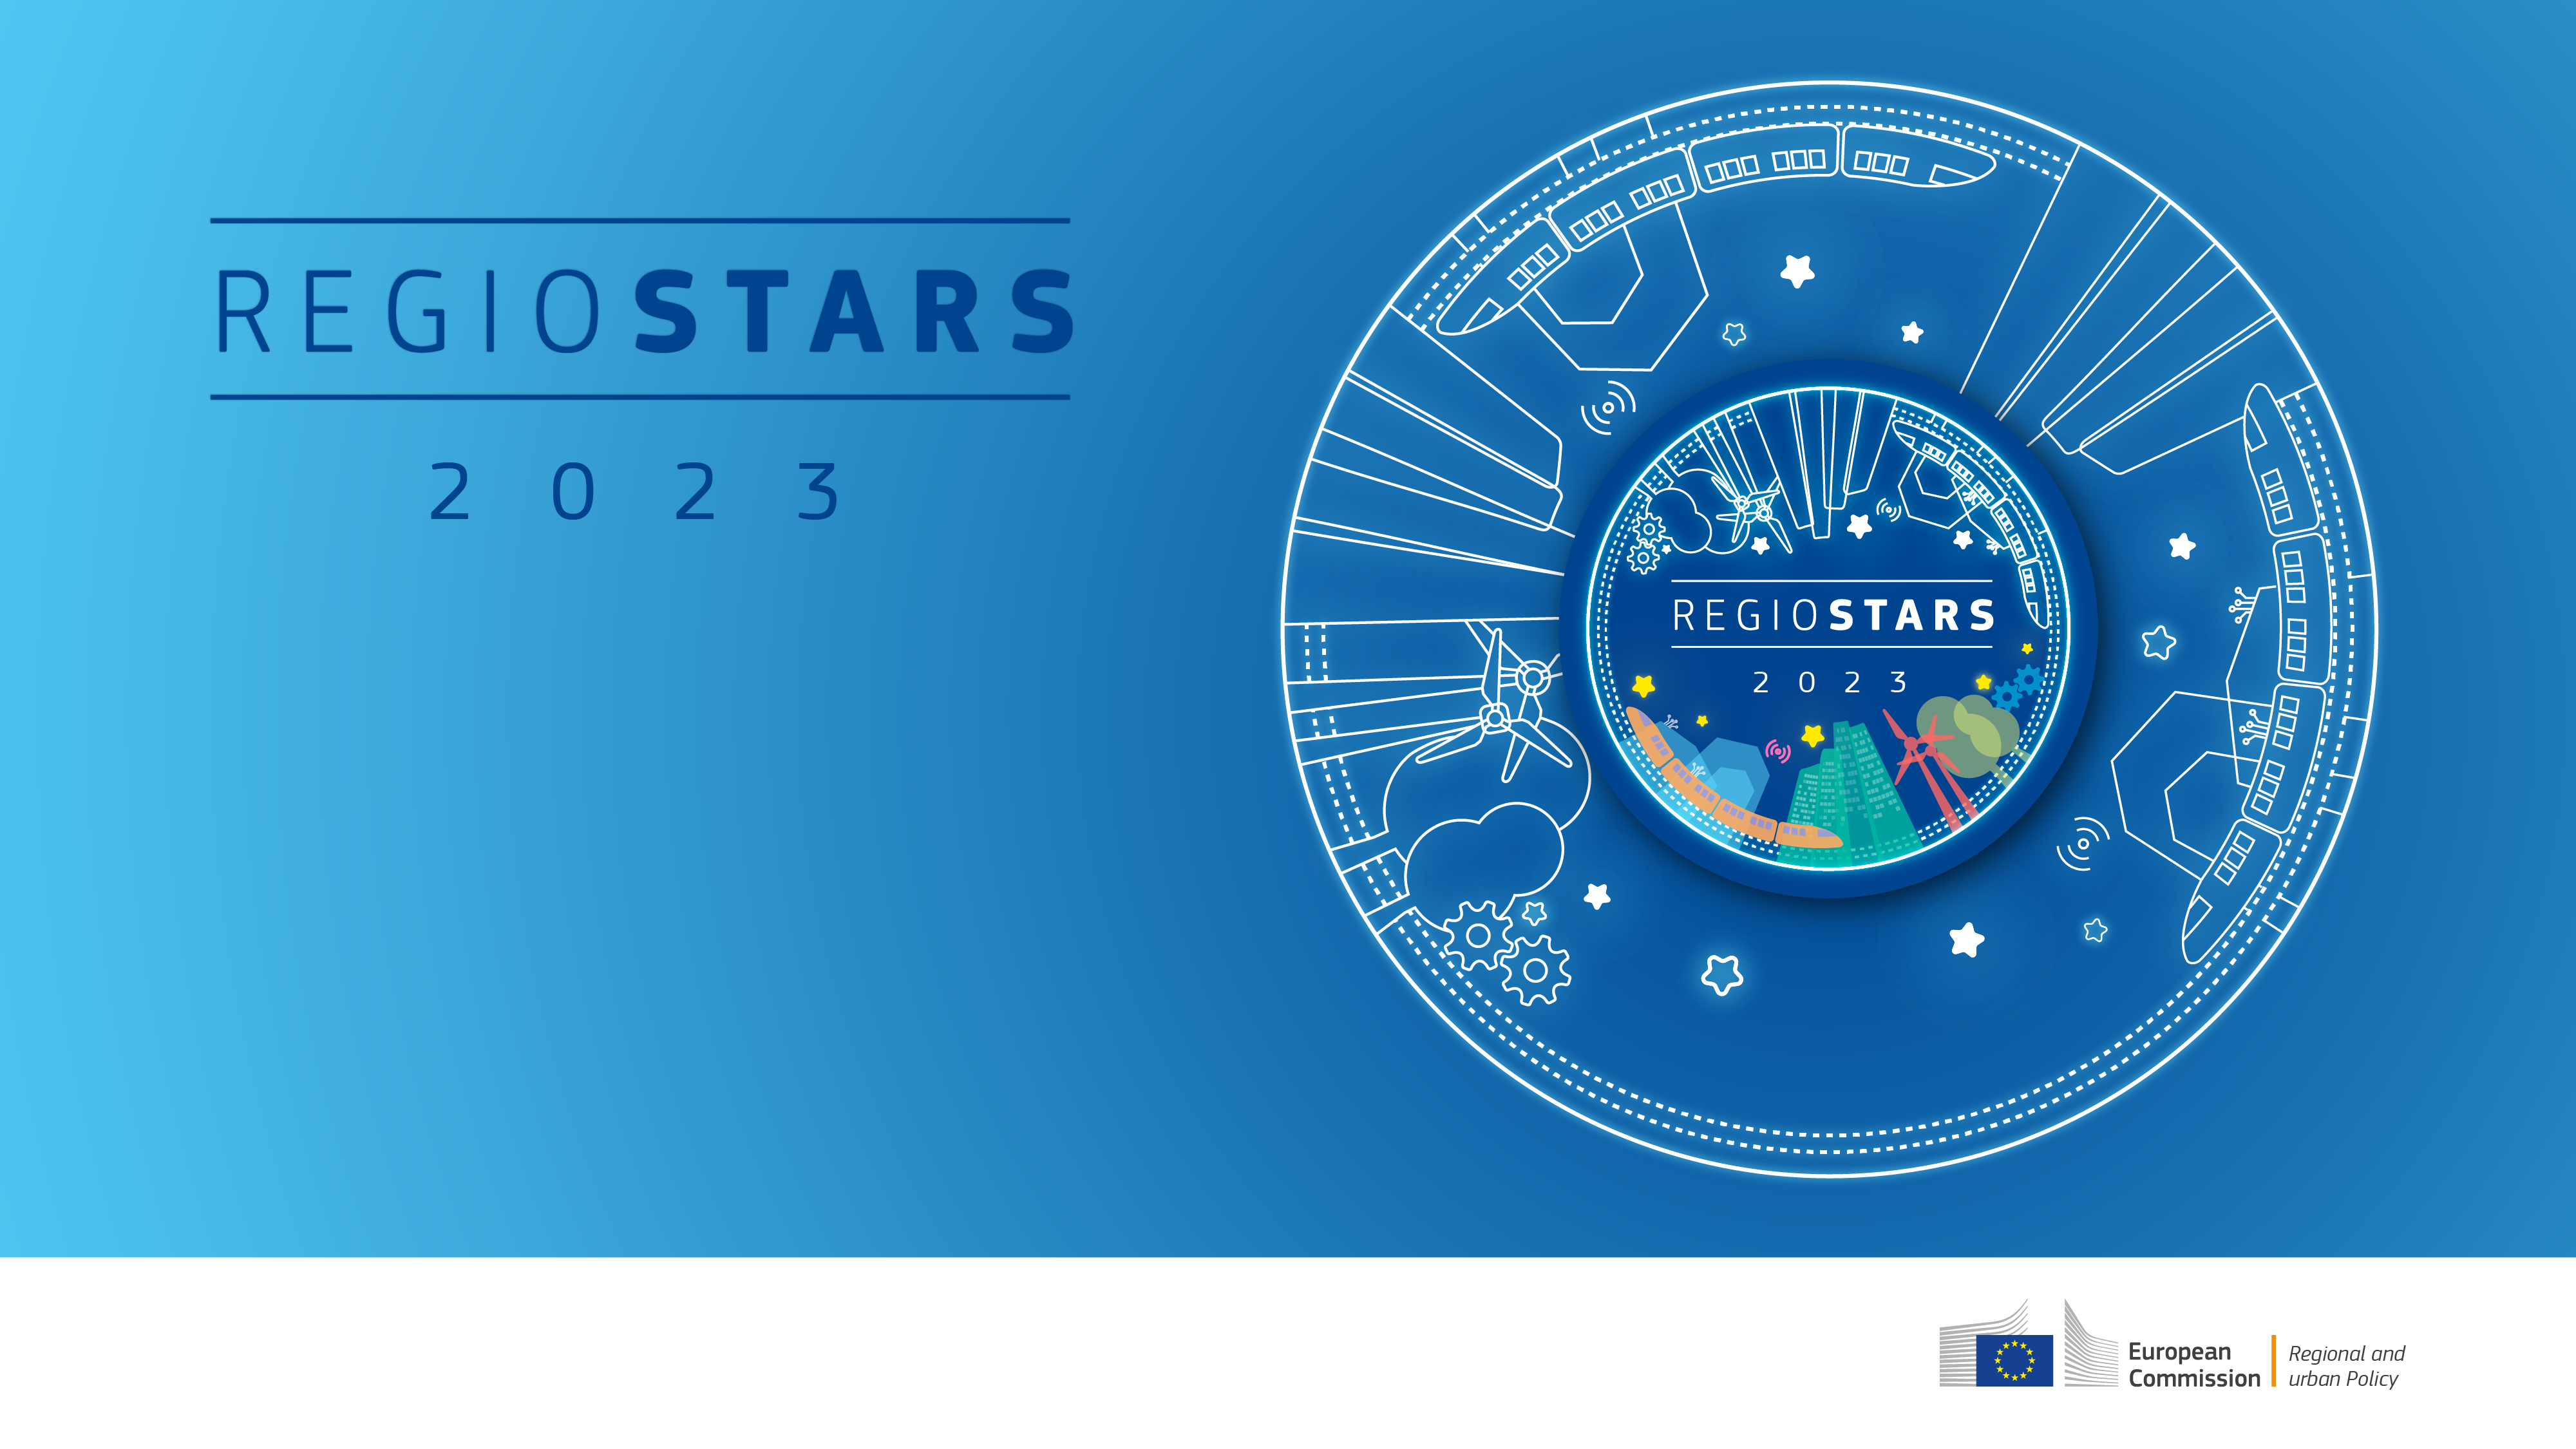 EU Cohesion Policy: Commission announces kick-off of the 2023 REGIOSTARS Awards competition